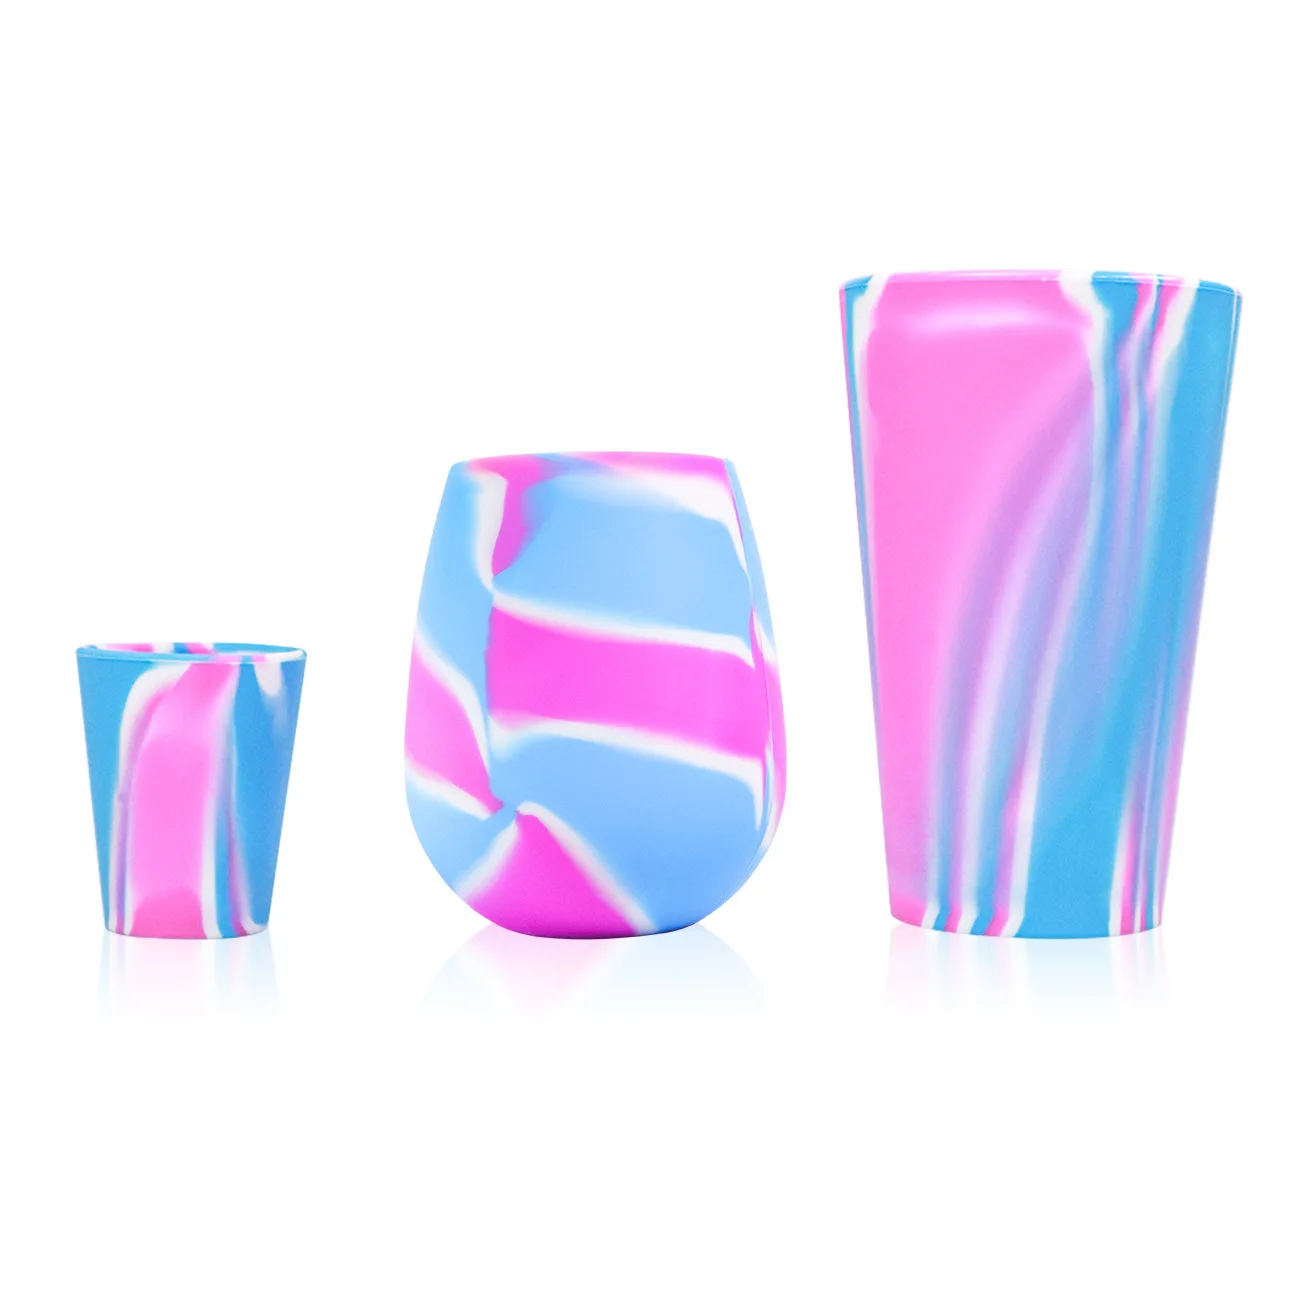 SiliSips: Your Rainbow of BPA-Free Silicone Cups Made In The USA